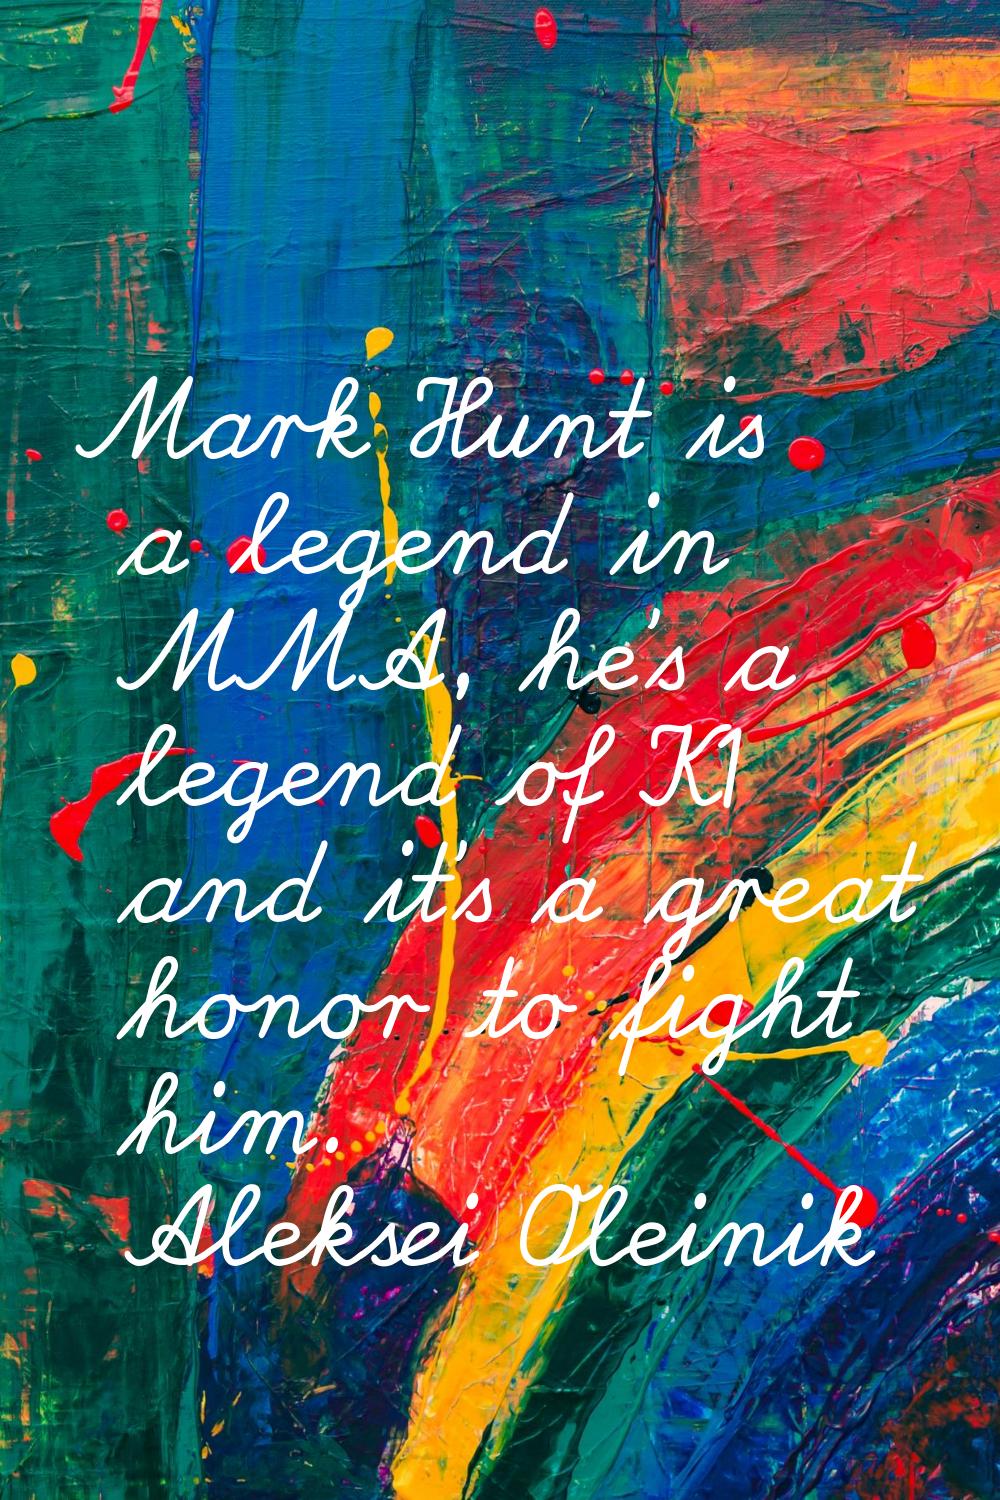 Mark Hunt is a legend in MMA, he's a legend of K1 and it's a great honor to fight him.